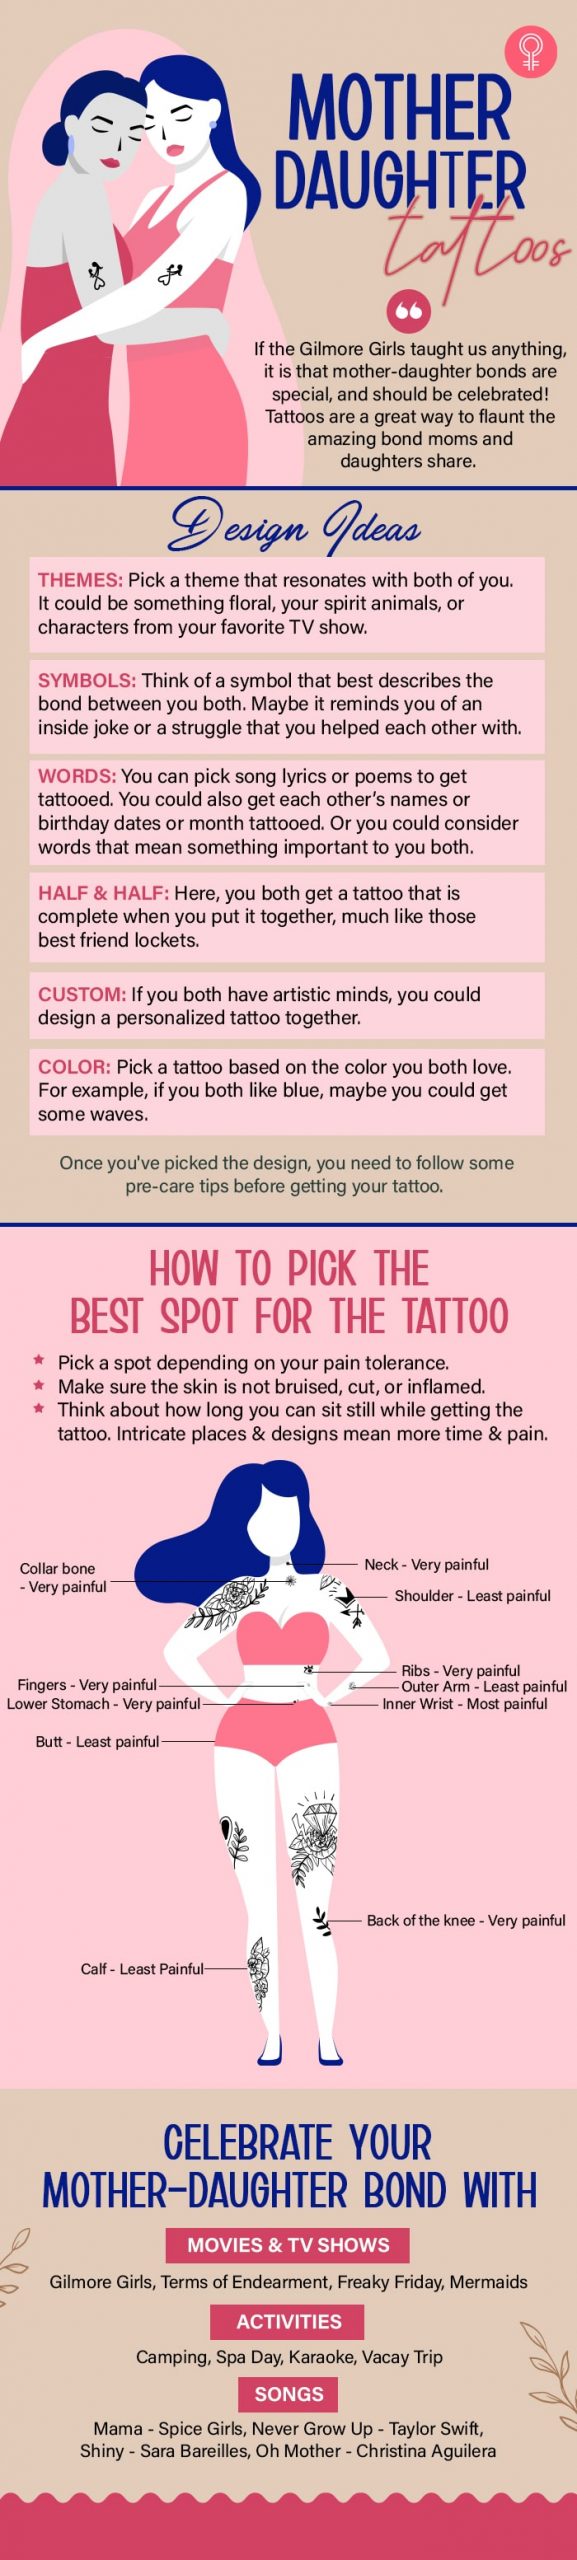 mother daughter tattoo ideas [infographic]